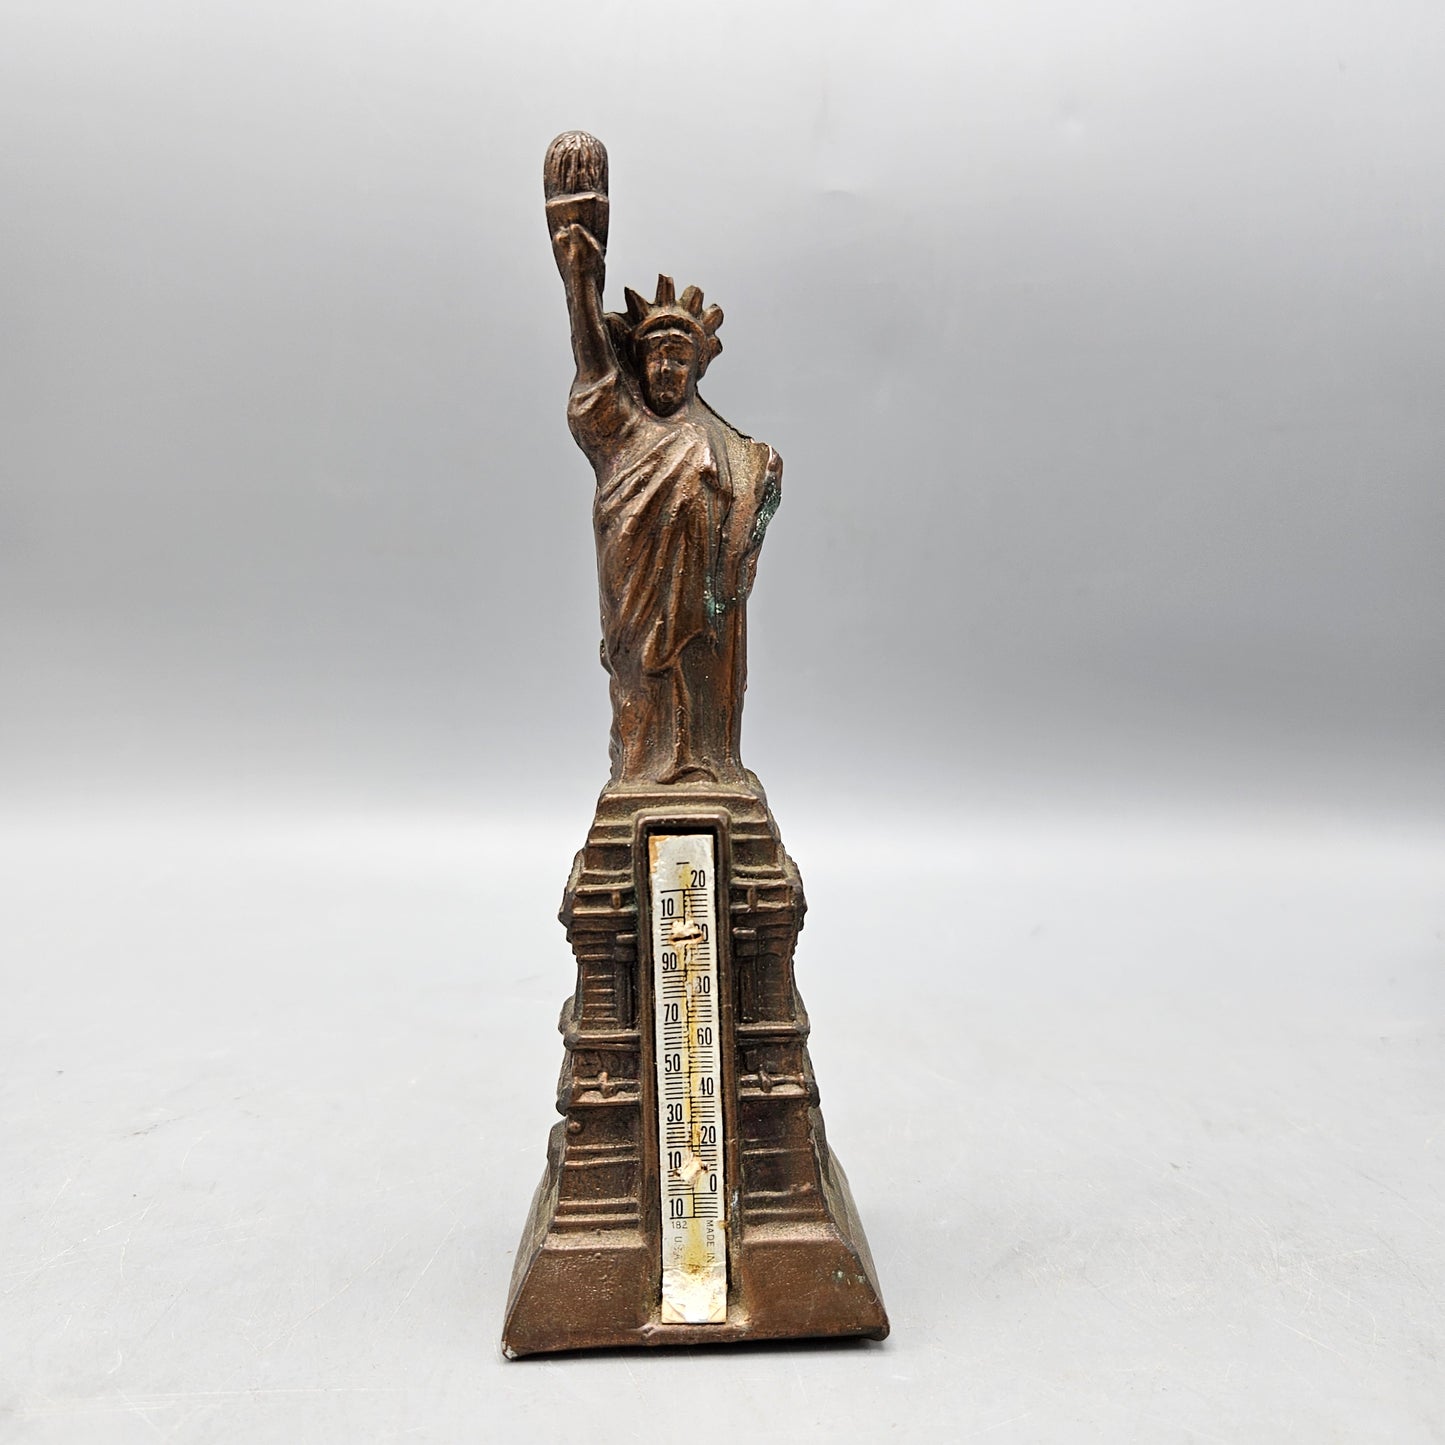 Vintage Souvenir Building Statue of Liberty with Thermometer